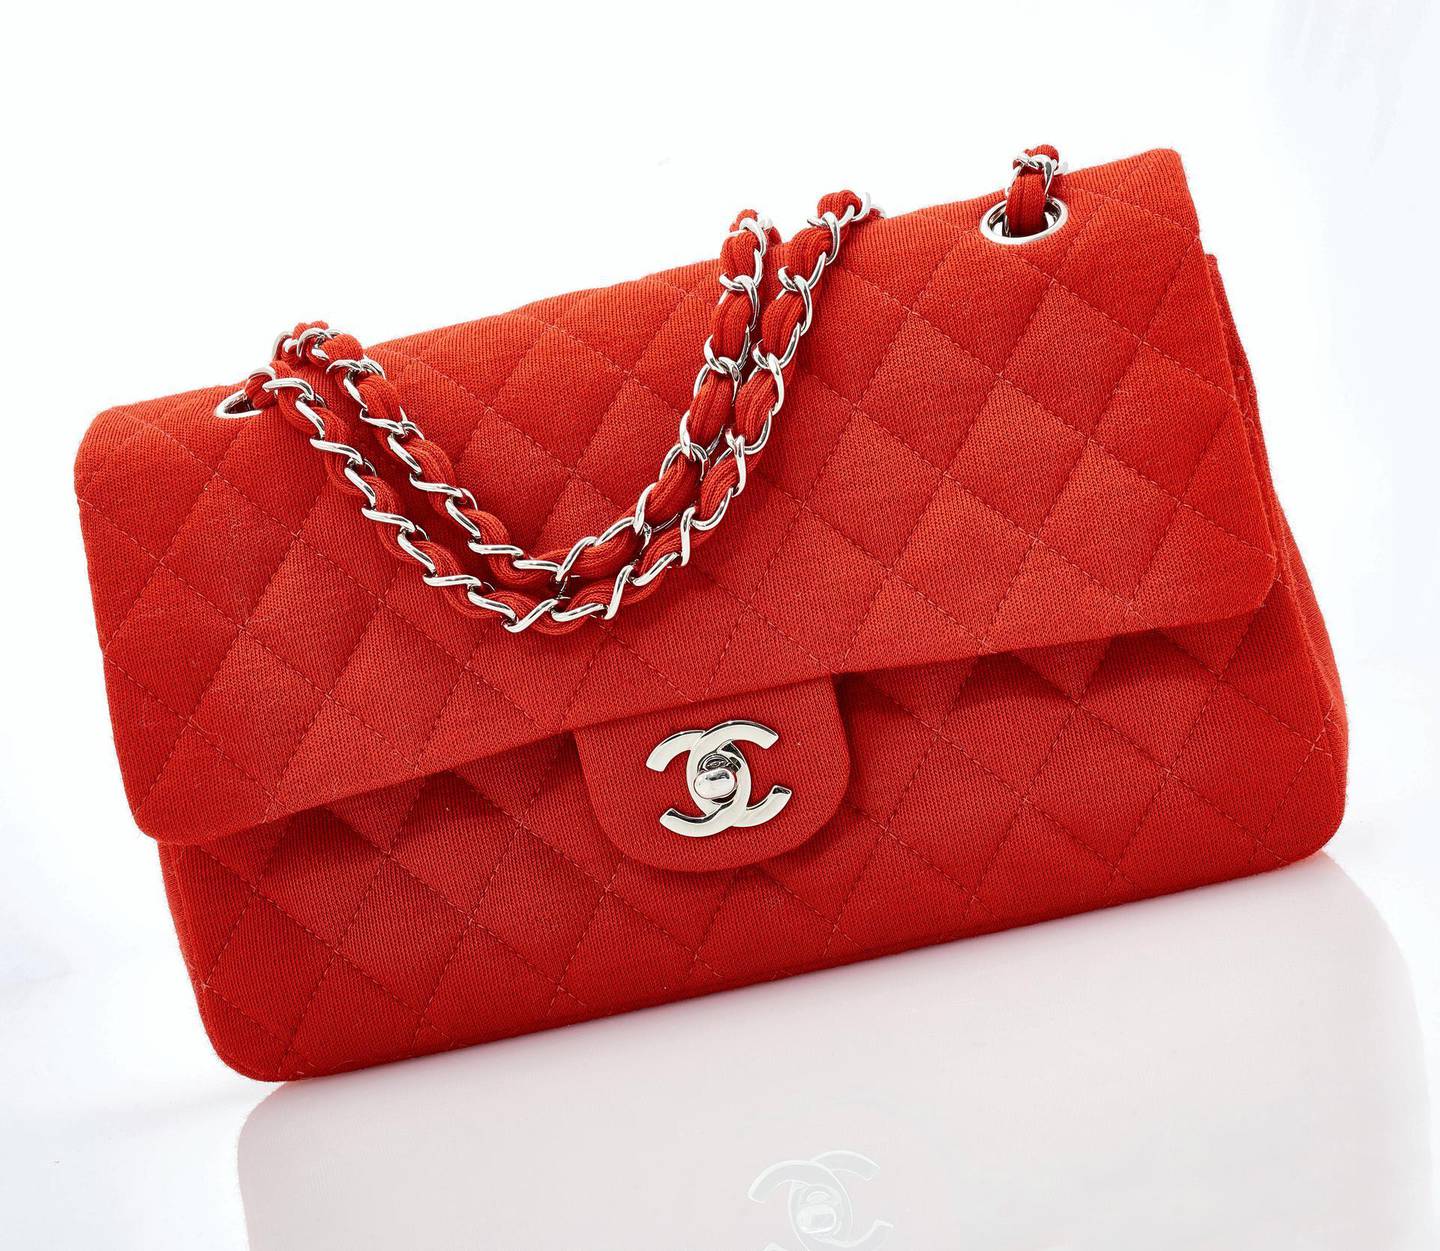 Red matalasse Chanel bag for auction. Courtesy Sotheby's